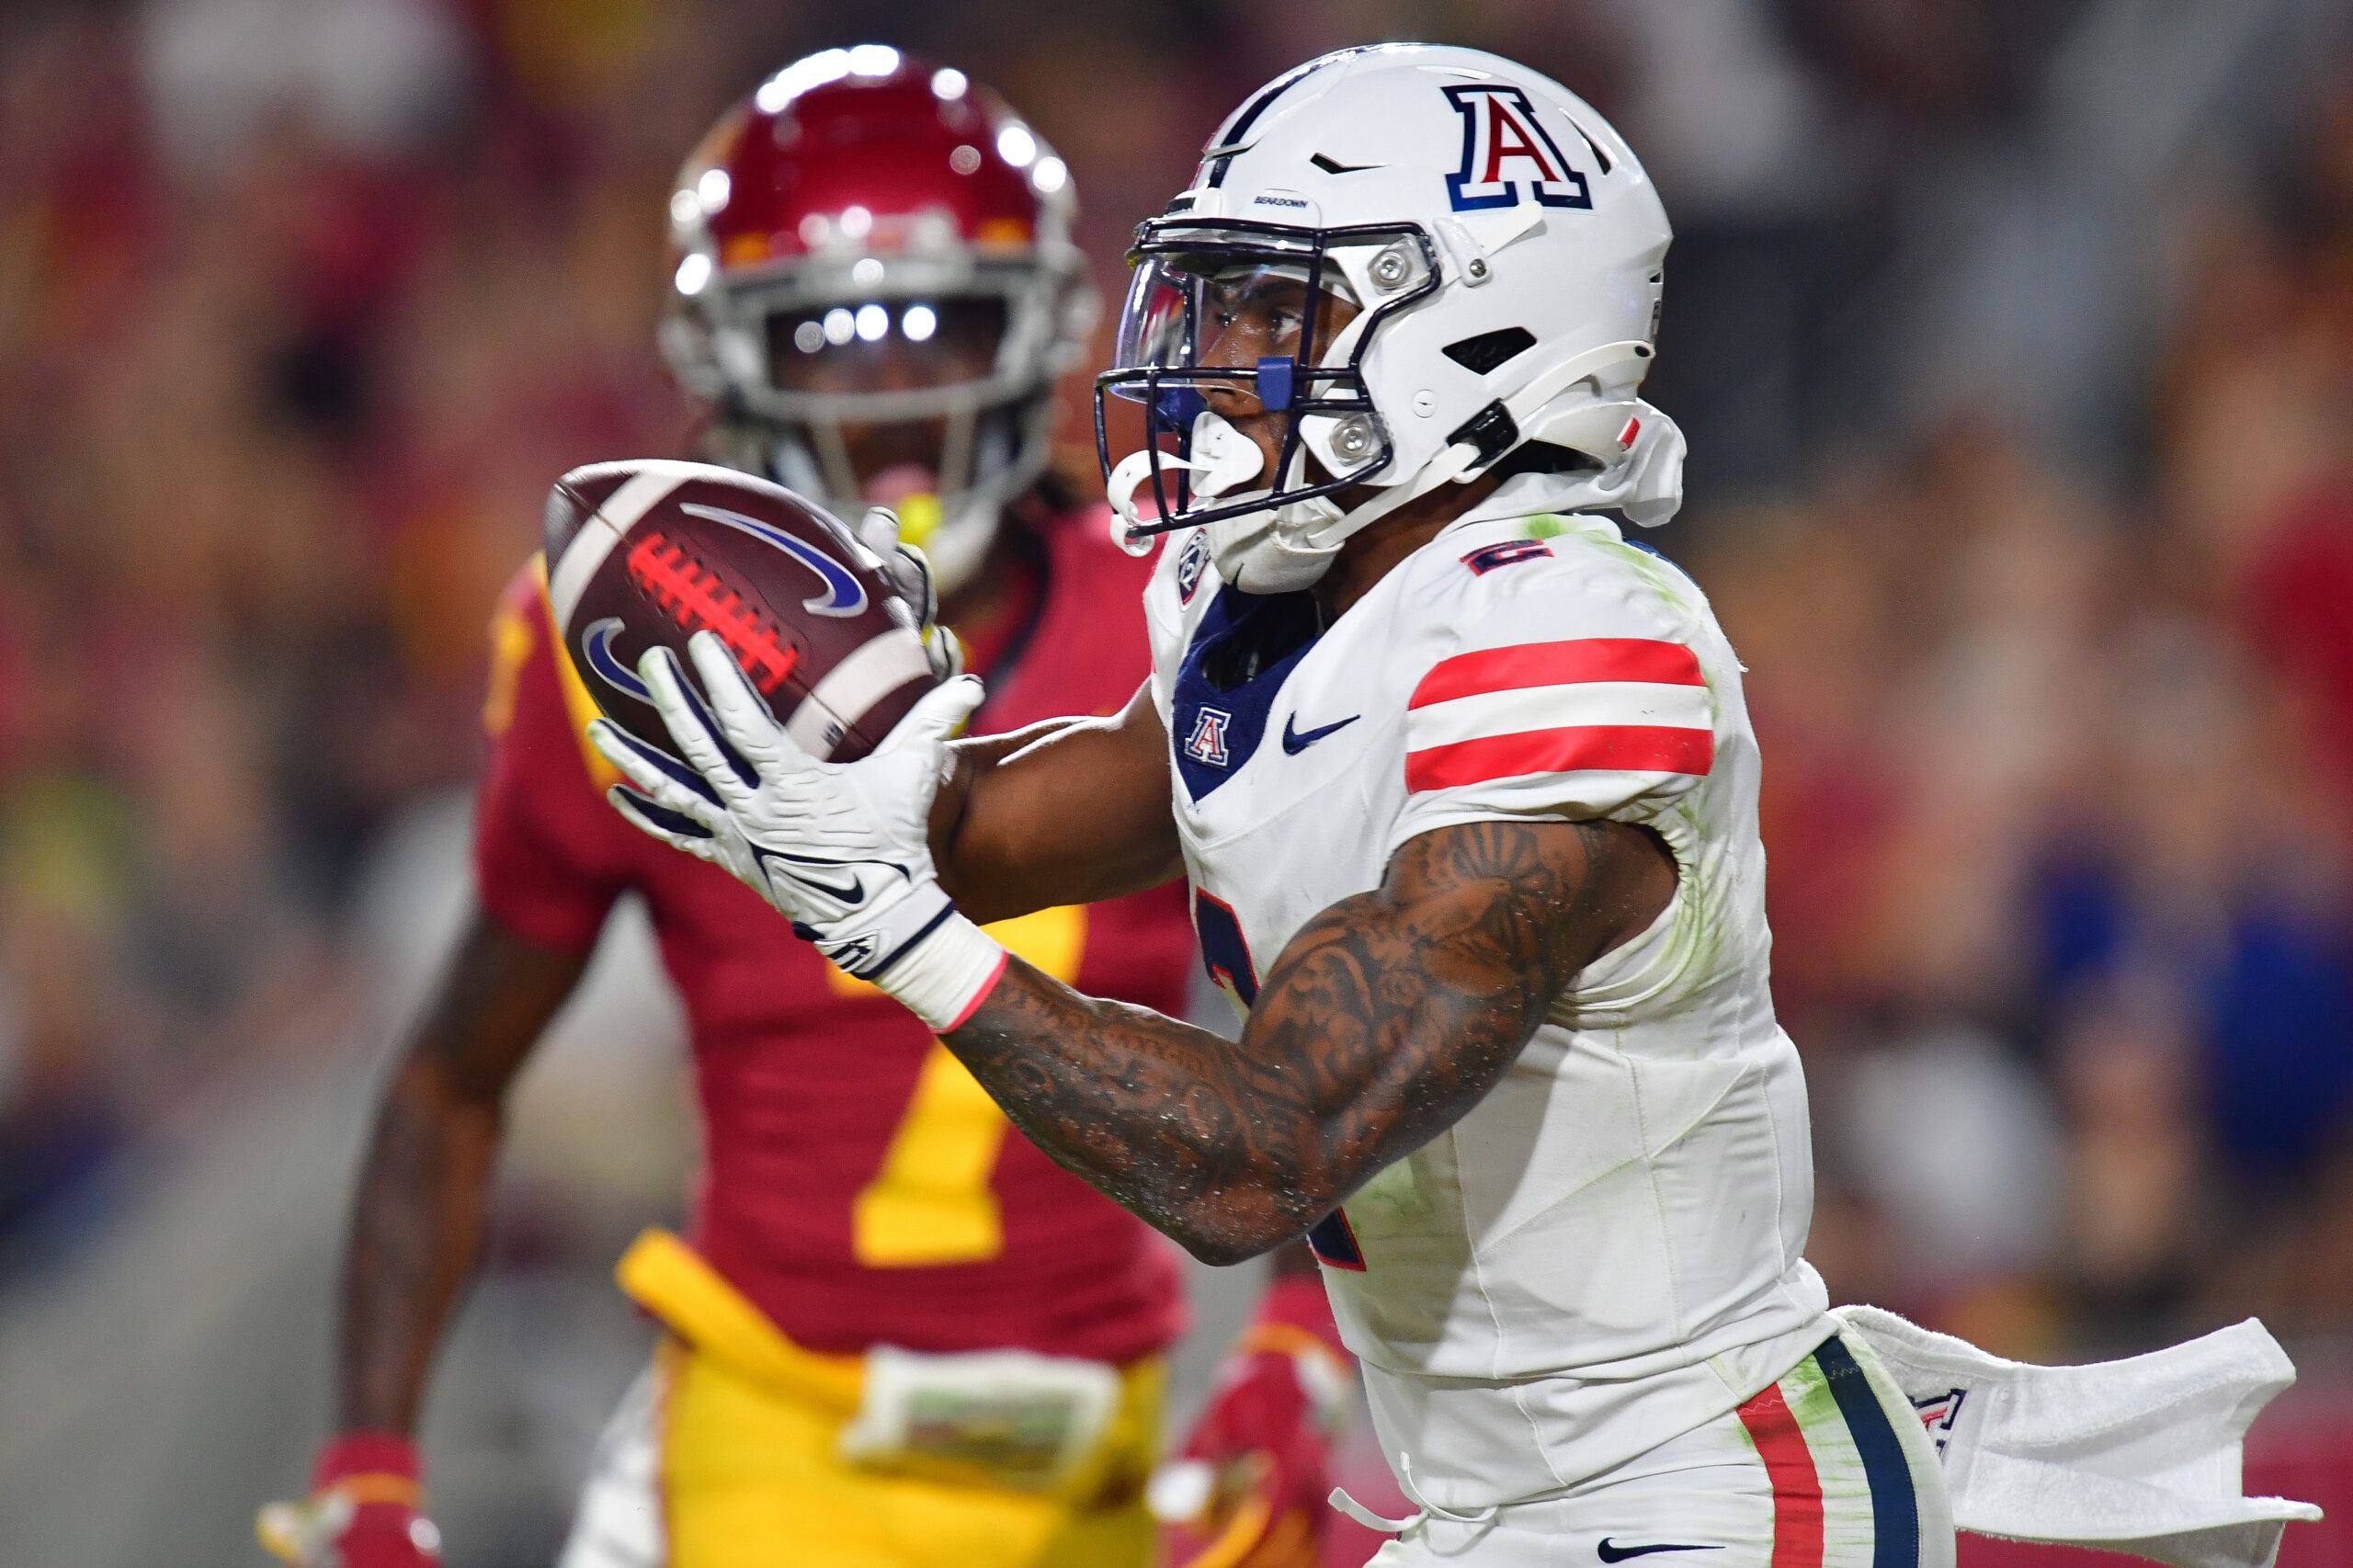 USC defense lacks toughness and physicality — and a victory doesn’t change that fact